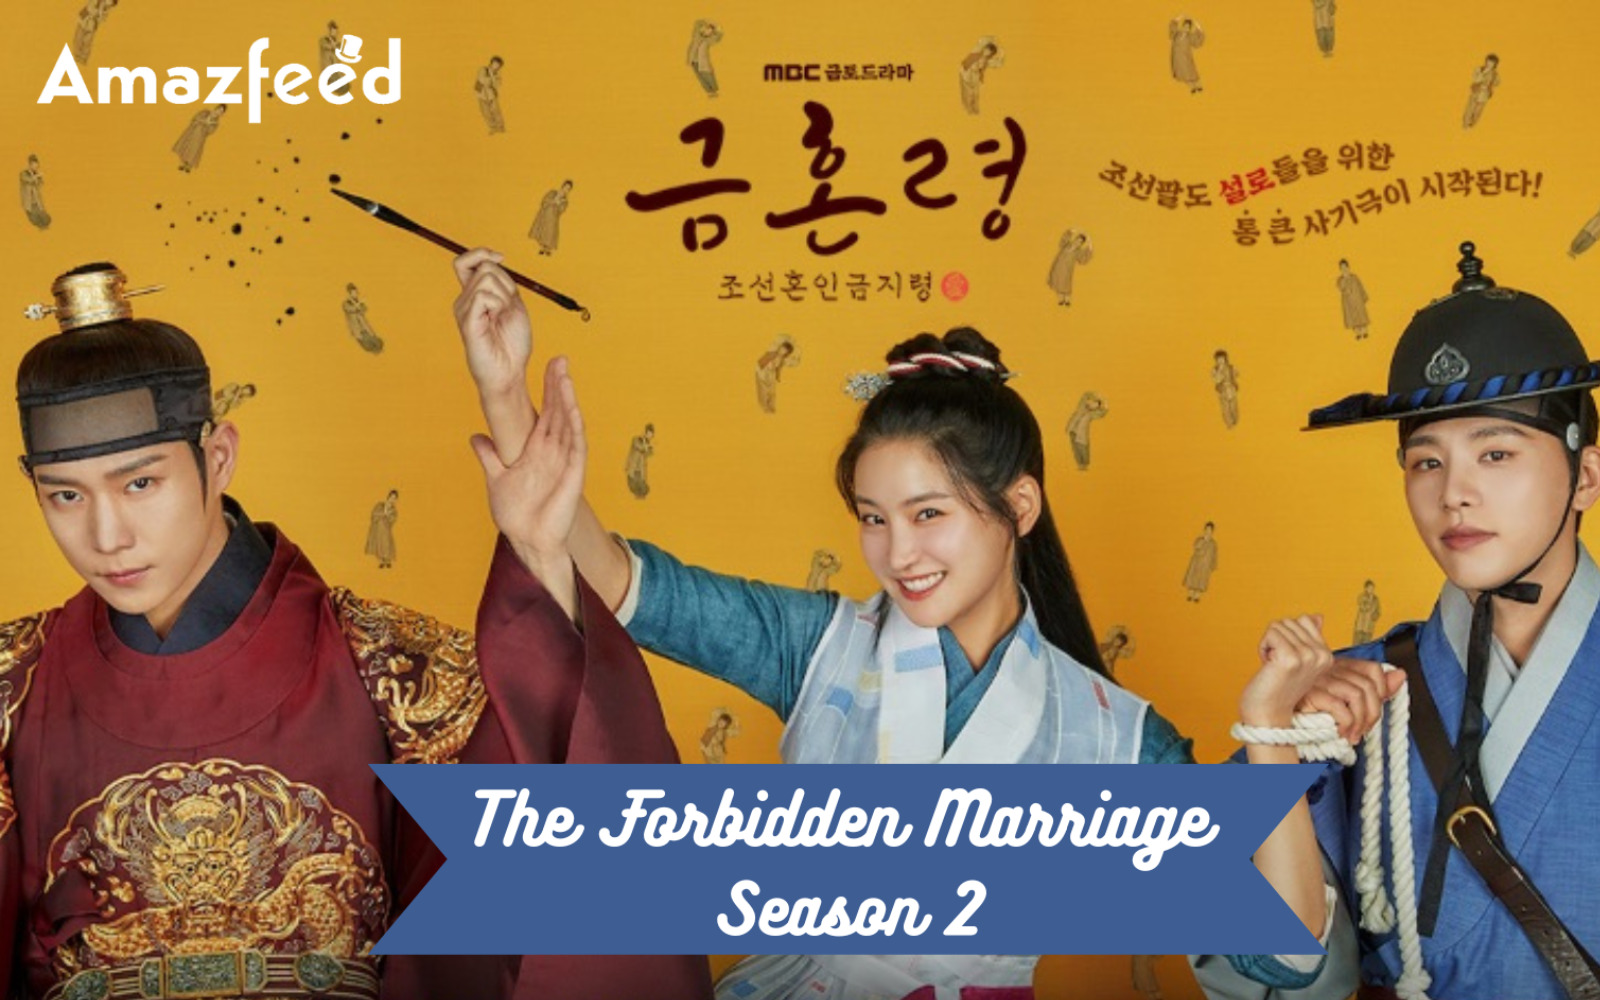 Is The Forbidden Marriage Season 2 Confirmed? The Forbidden Marriage